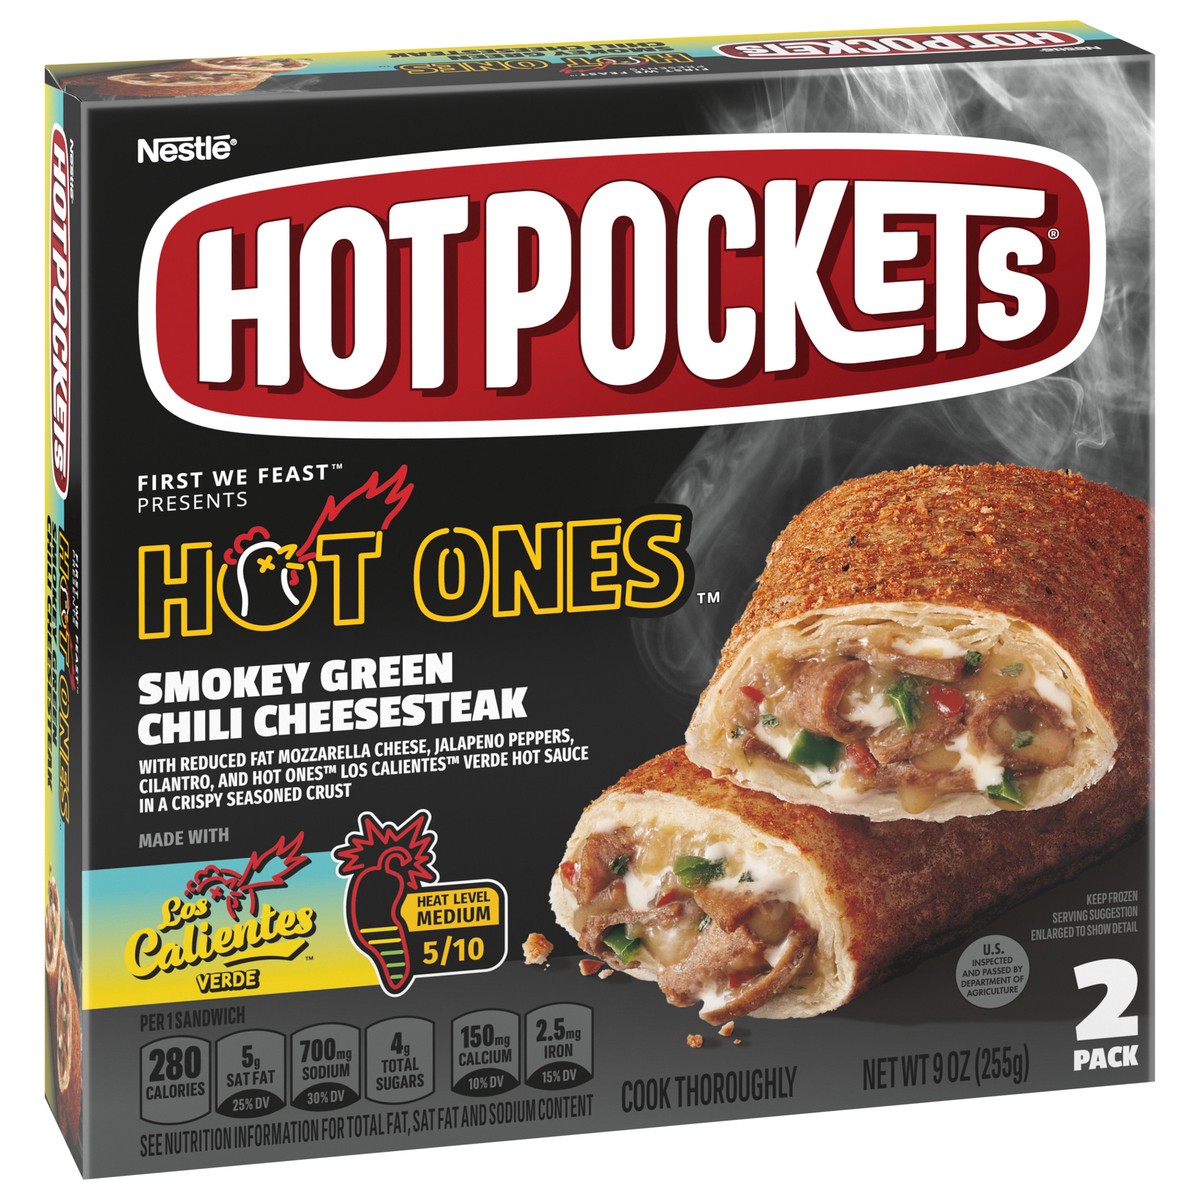 slide 2 of 9, Hot Pockets Hot Ones Smokey Green Chili Cheesesteak Frozen Snacks in a Crispy Buttery Crust, Steak and Cheese Sandwiches Made with Real Cheddar Cheese, 2 Count Frozen Sandwiches, 2 ct